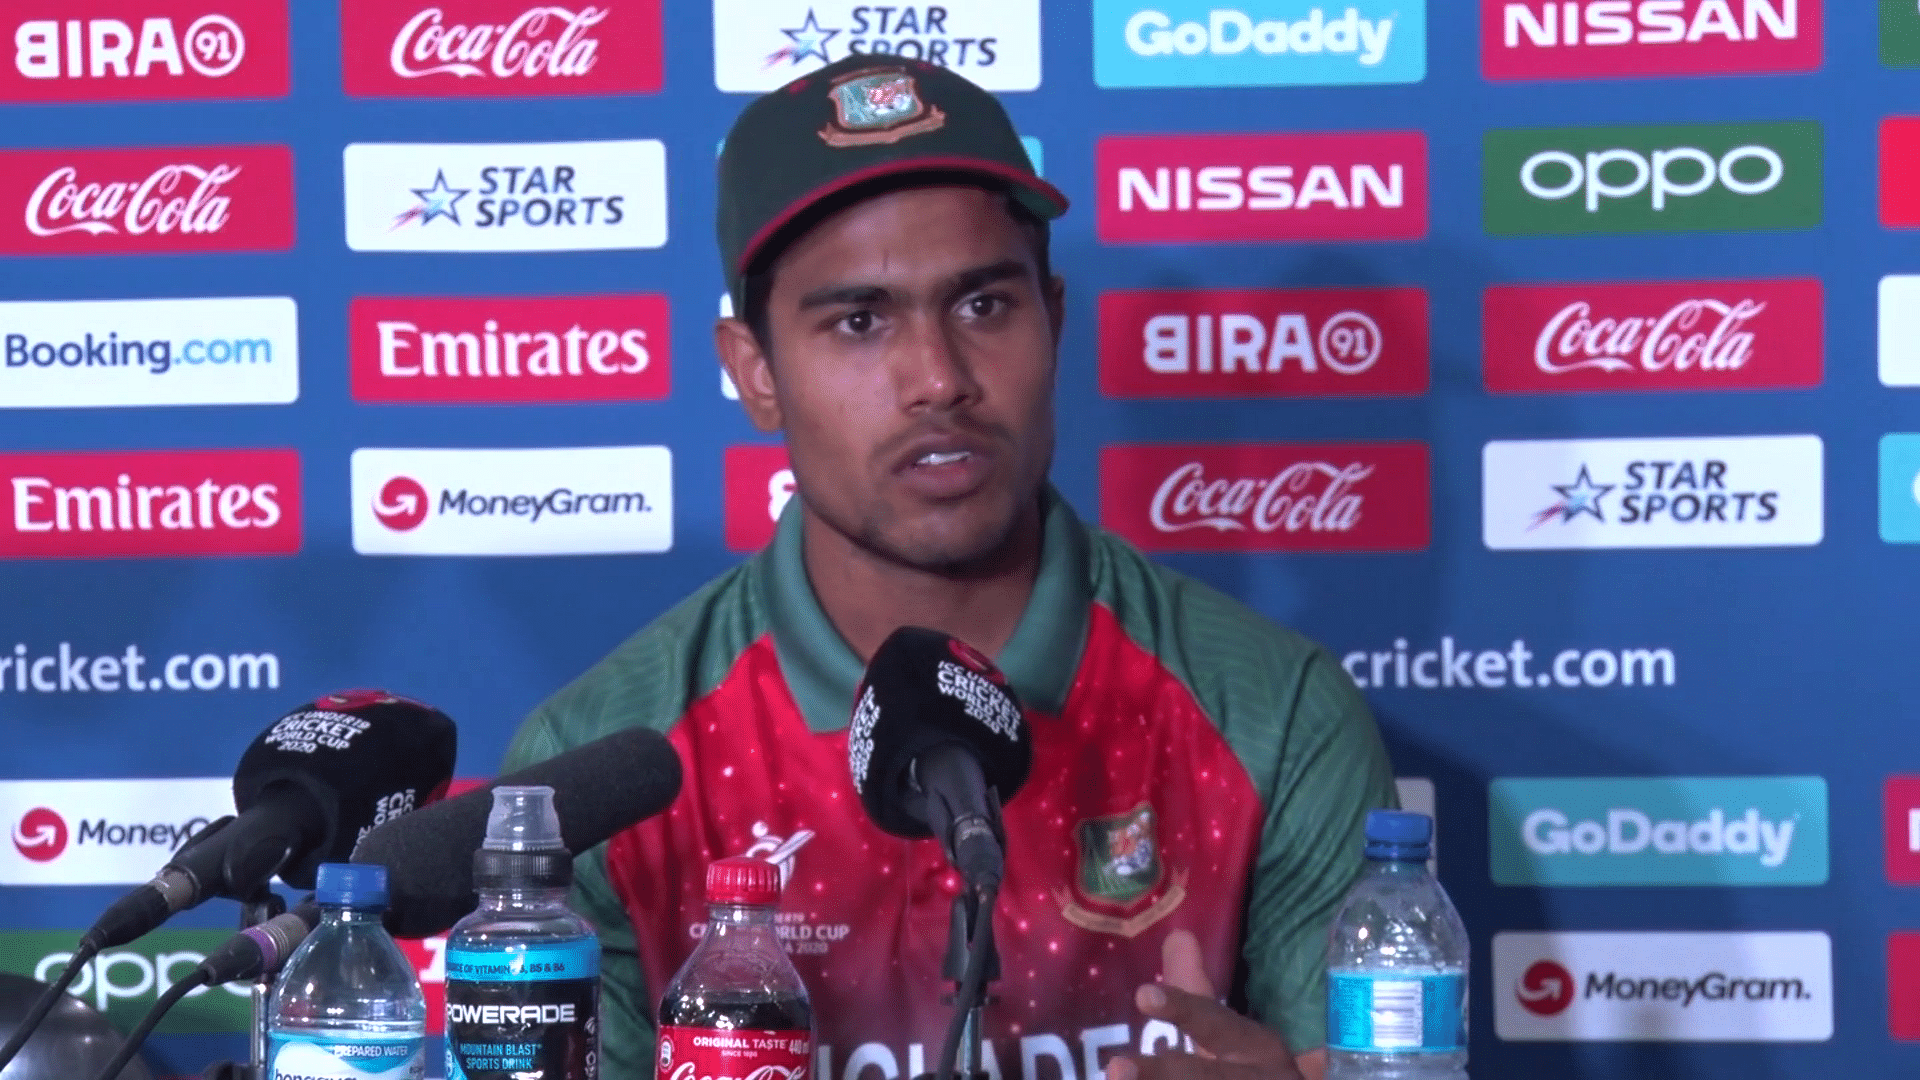 Bangladesh skipper Akbar Ali scored a match-winning knock of 43 off 77 deliveries to help his side clinch the under-19 World Cup for the first time in history.